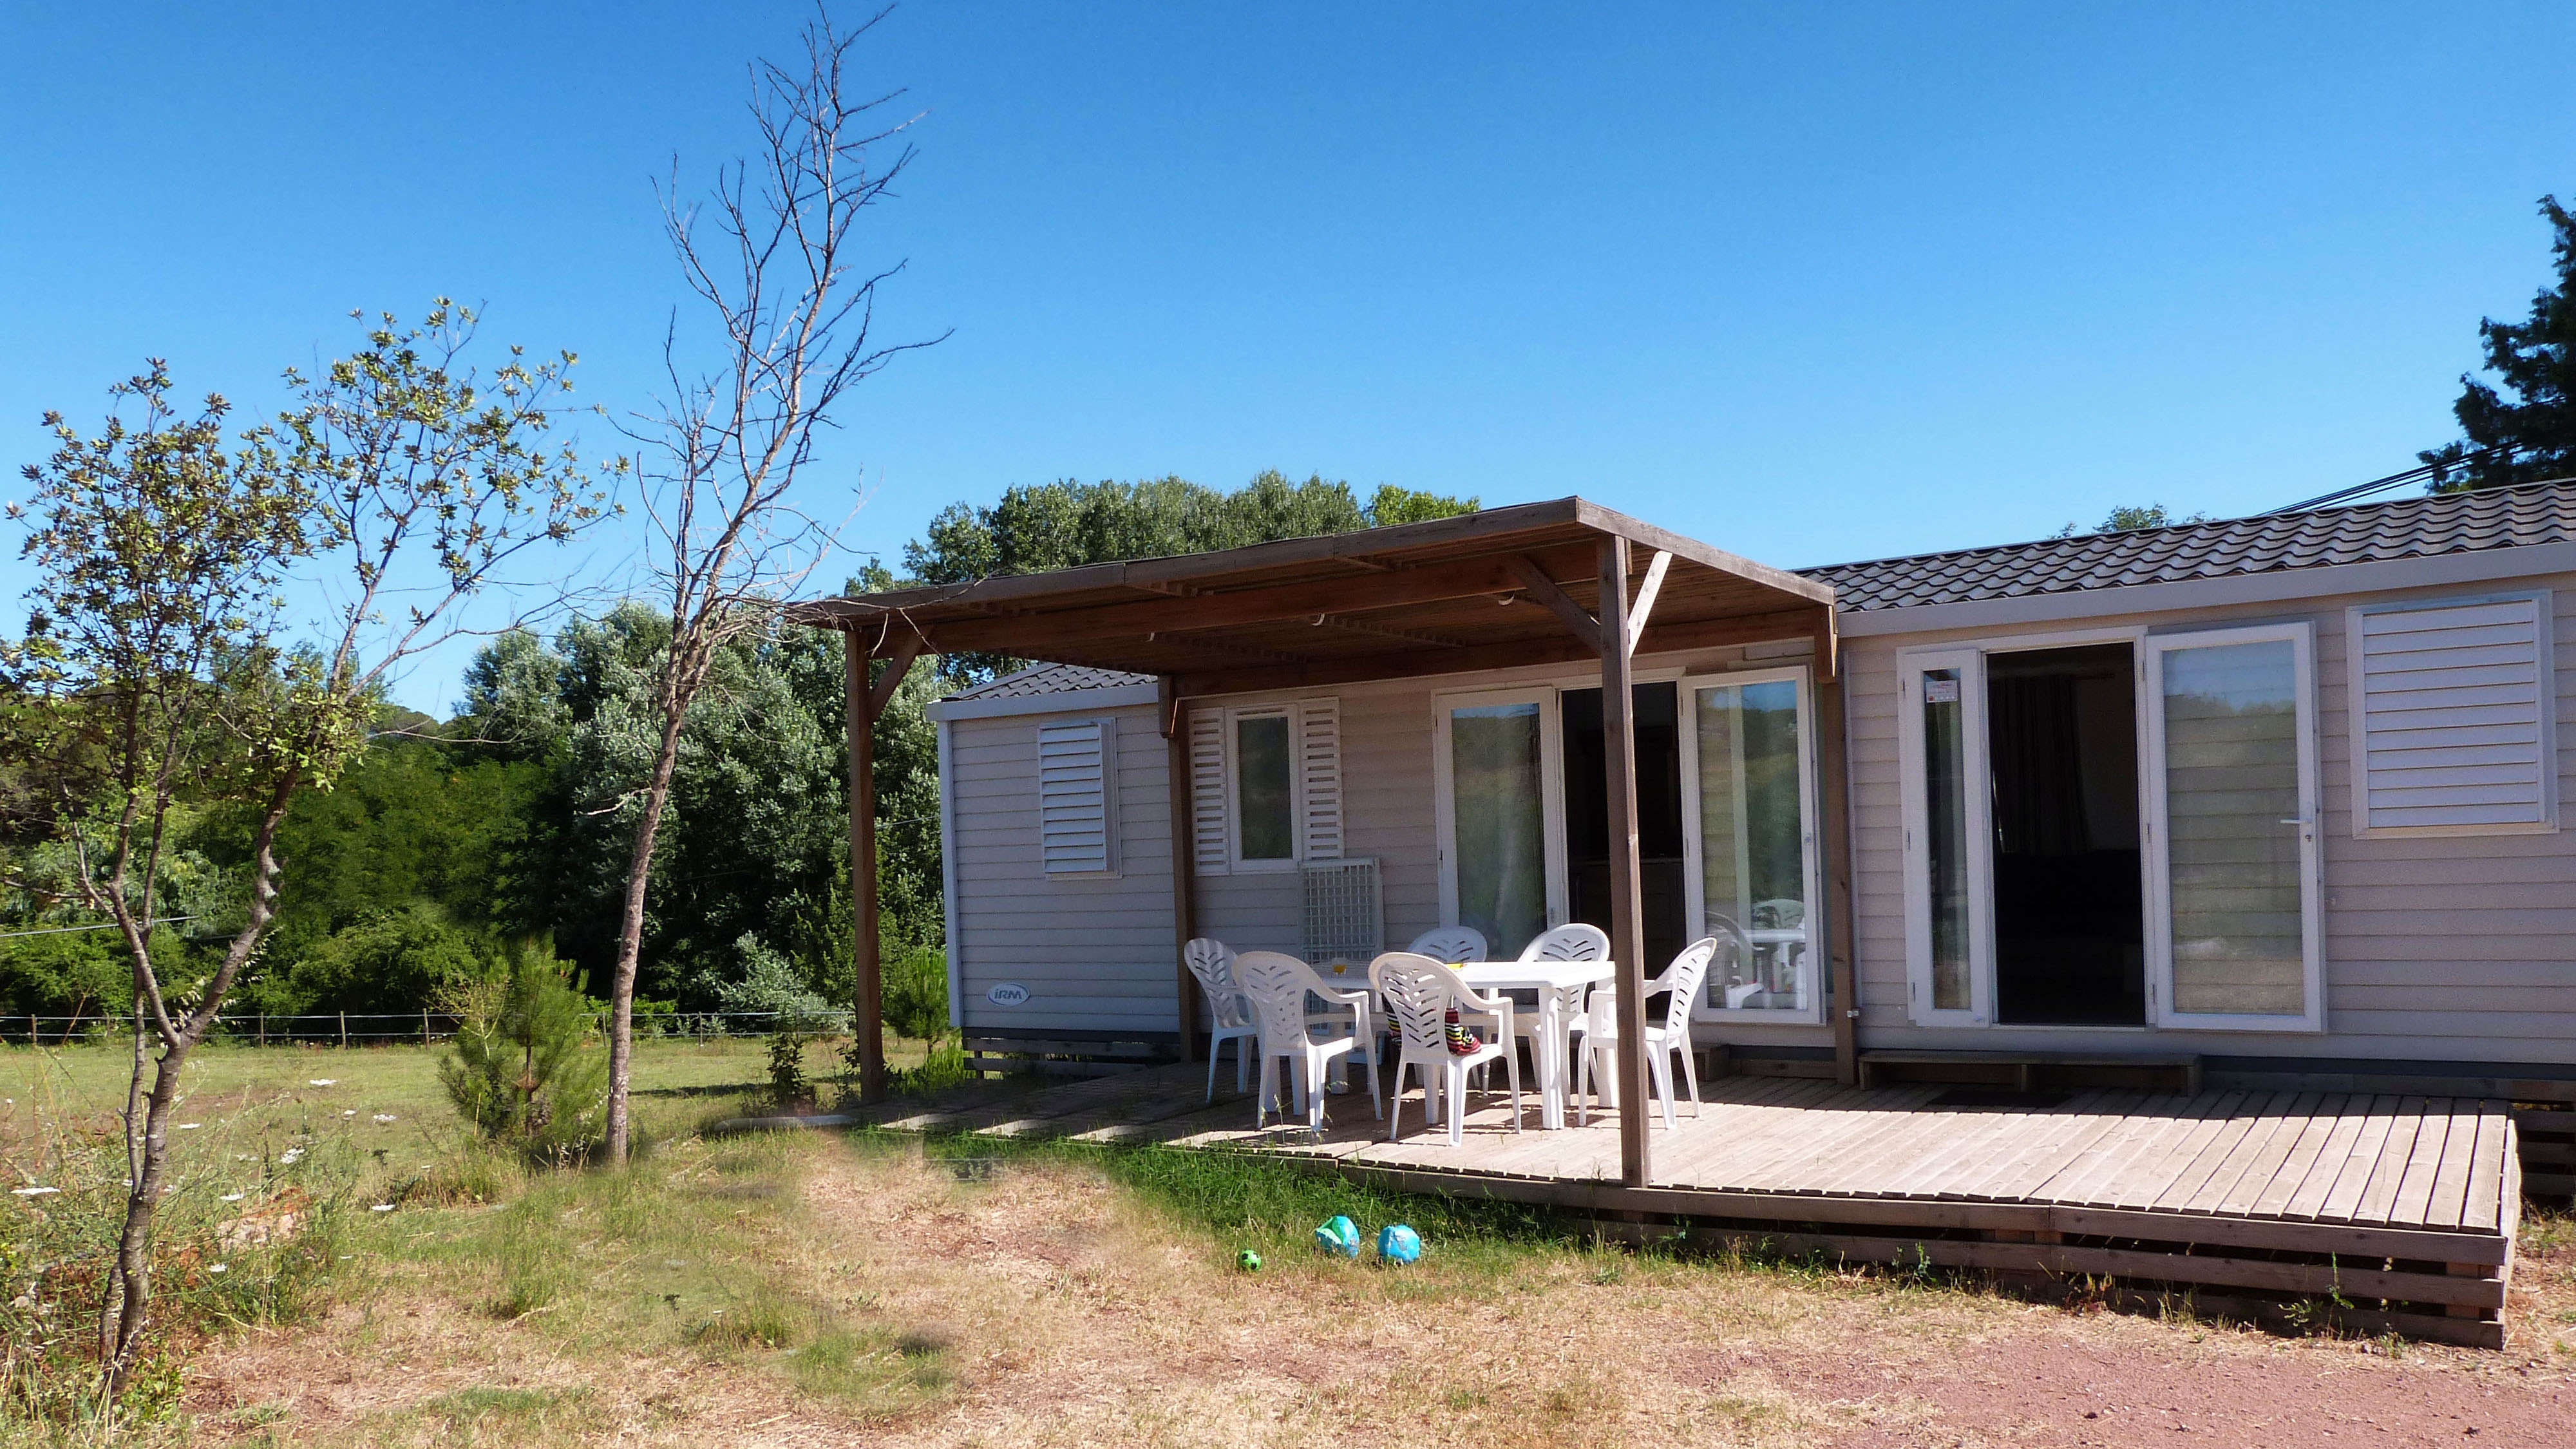 Location - Indiana Confort - Camping Les Cigales, Le Muy